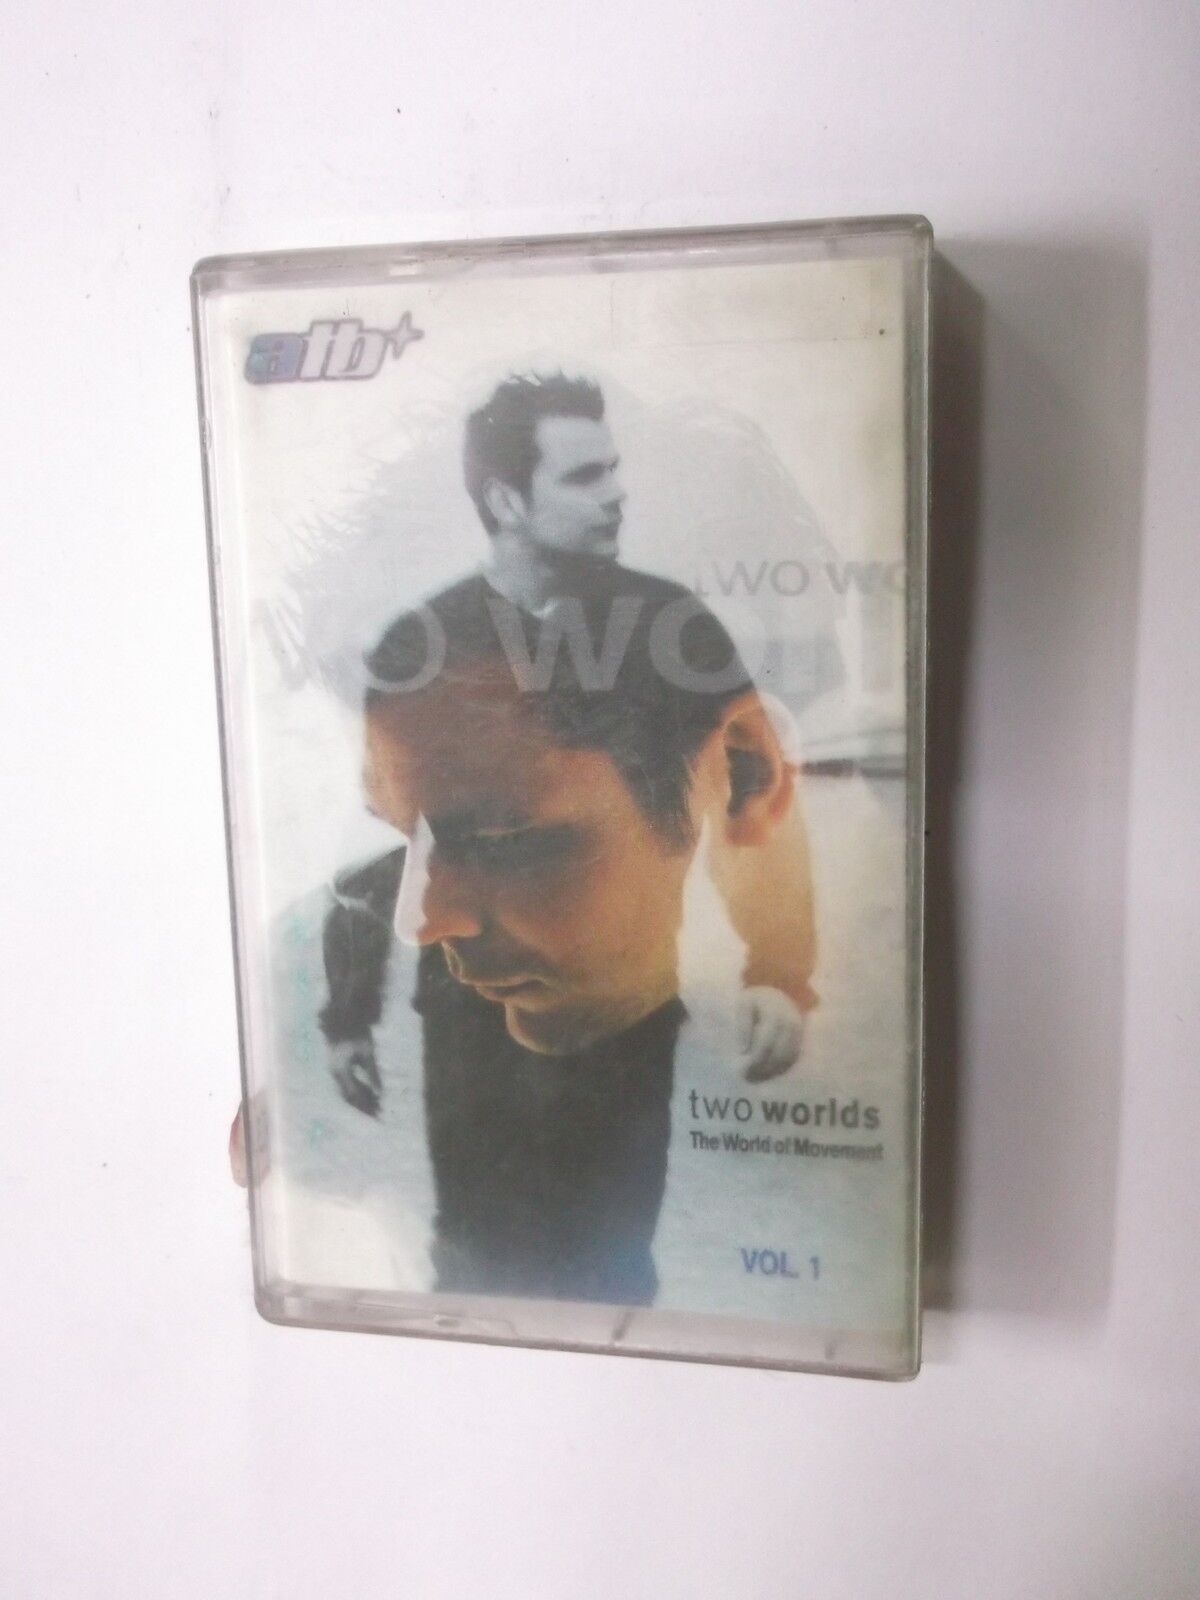 ATB VOL 1 TWO WORLDS THE WORLD OF MOVEMENT  2001 RARE CASSETTE TAPE INDIA